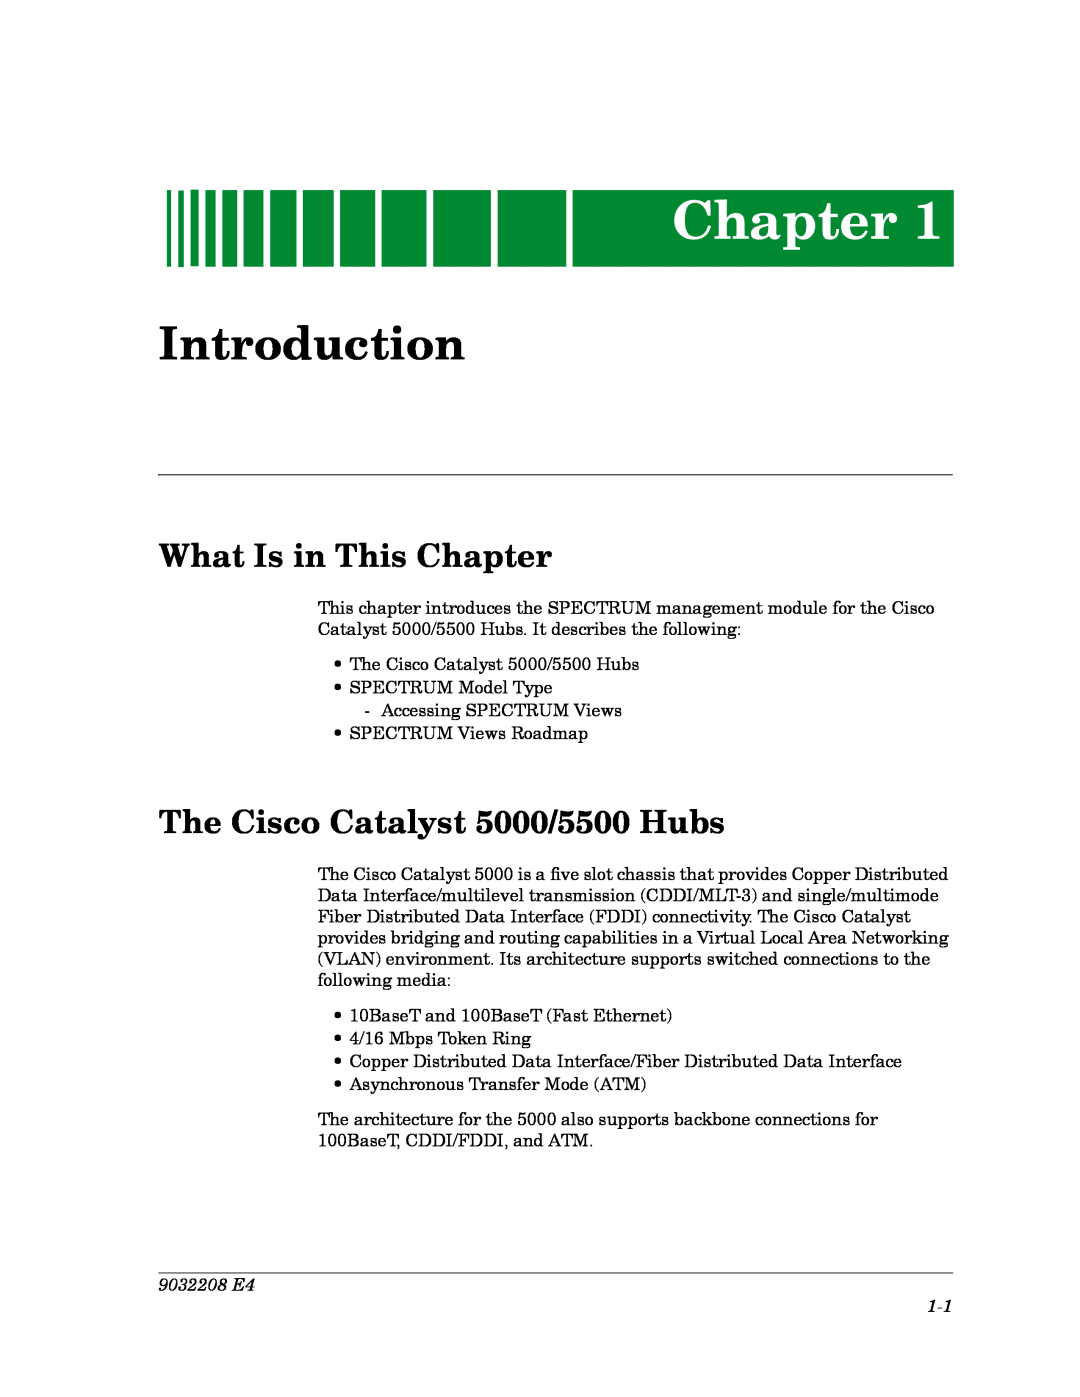 Cabletron Systems 5000, 5500 Introduction, What Is in This Chapter, The Cisco Catalyst 5000/5500 Hubs, 9032208 E4 1-1 